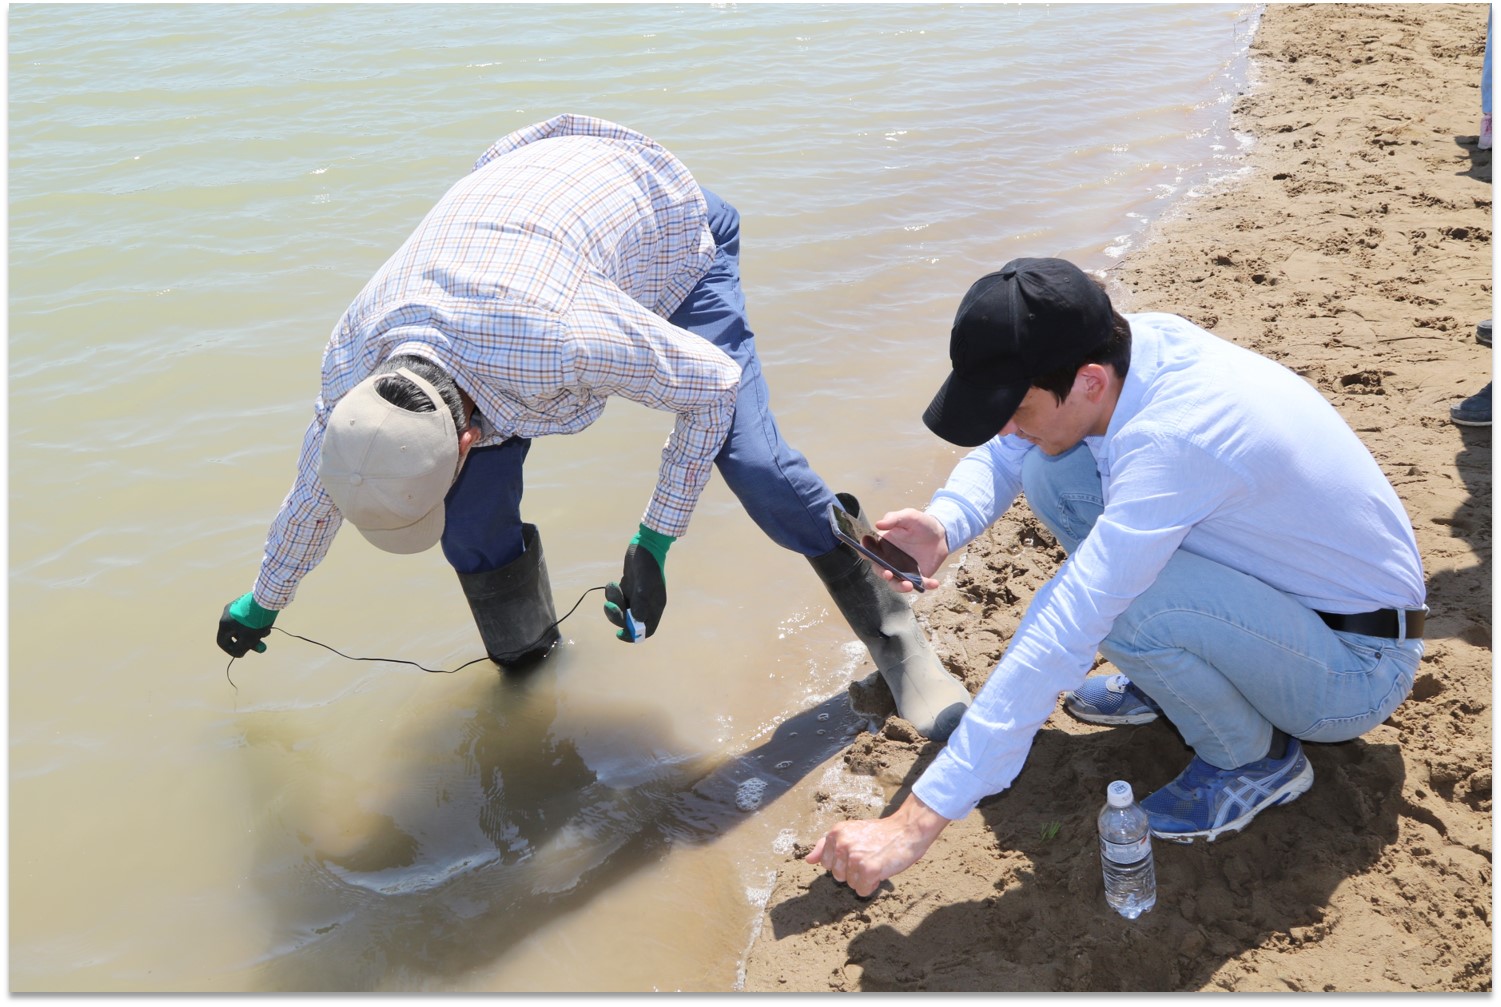 Participants conducting fieldwork as part of the Advancing Key Curriculums of Ecology and Environmental Sciences for Regional Universities in Kazakhstan and Beyond” program.